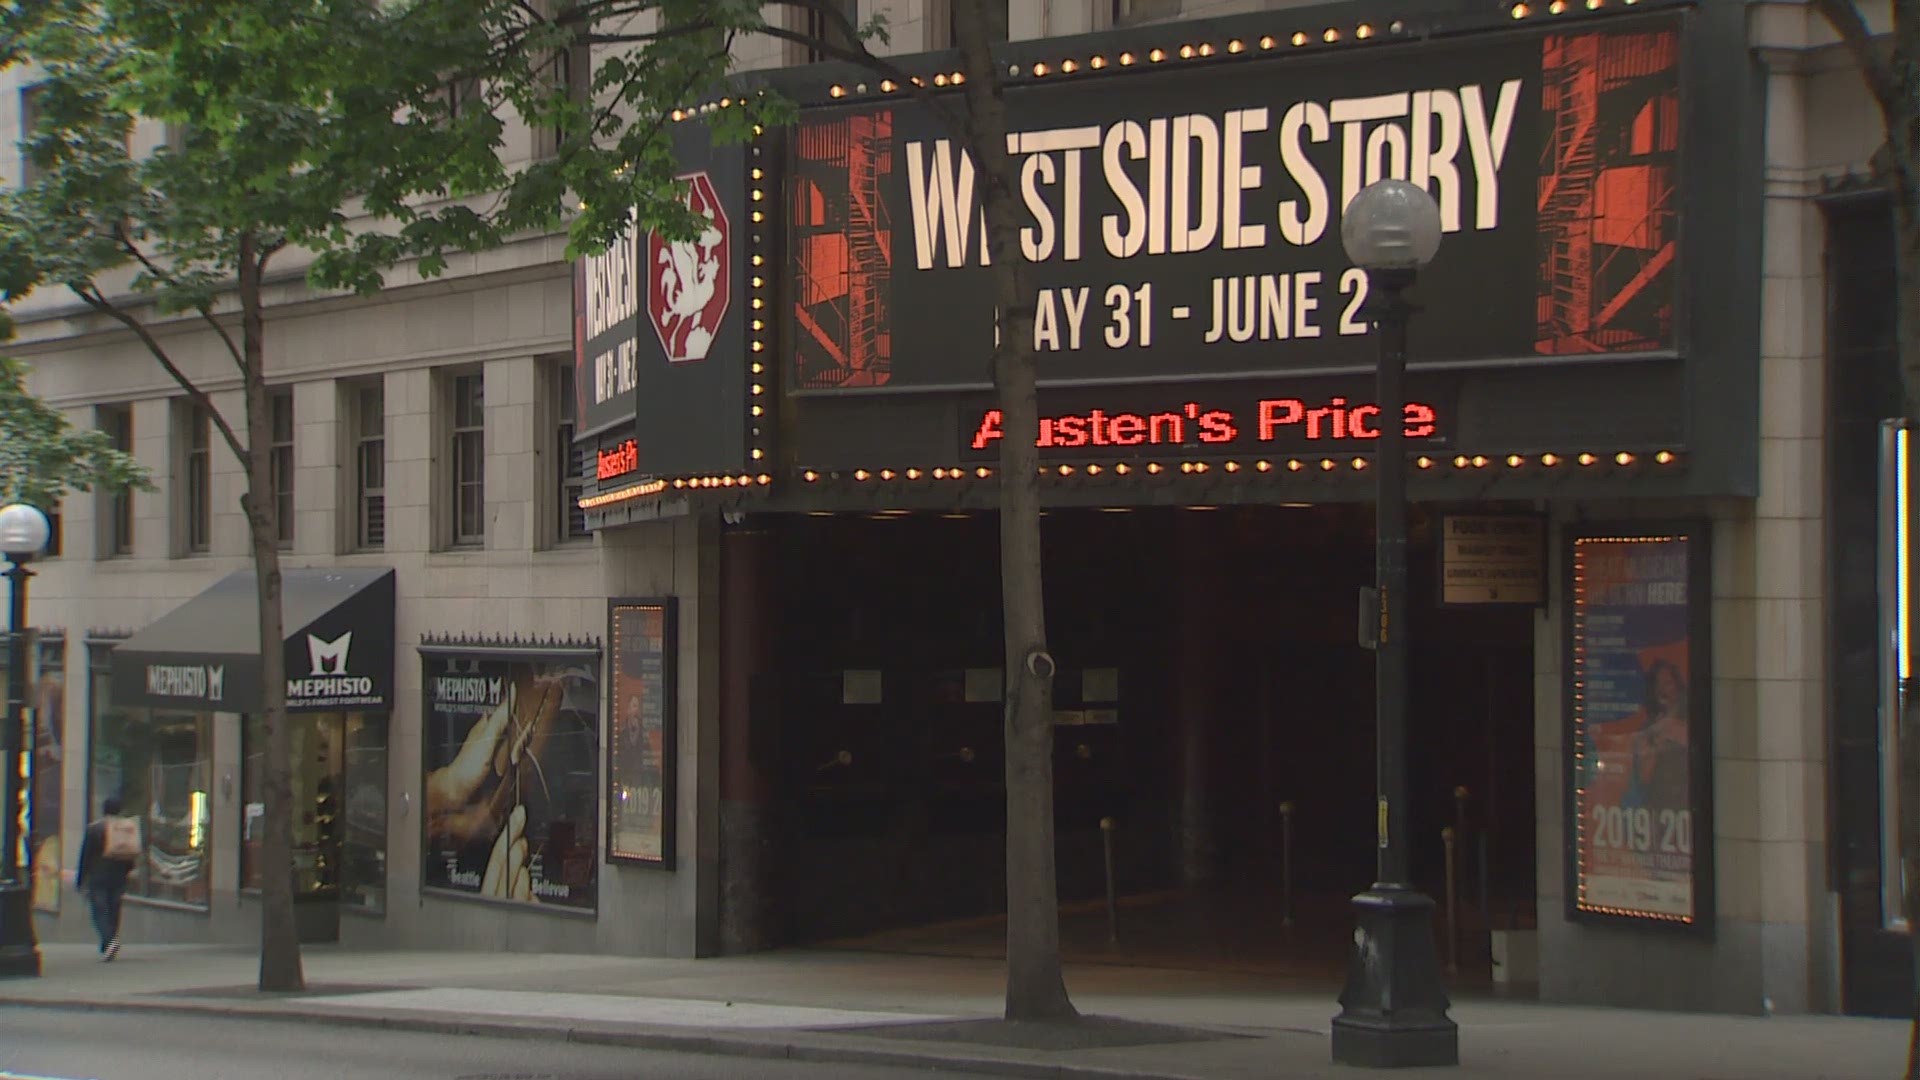 The theater will make changes to become more ADA compliant